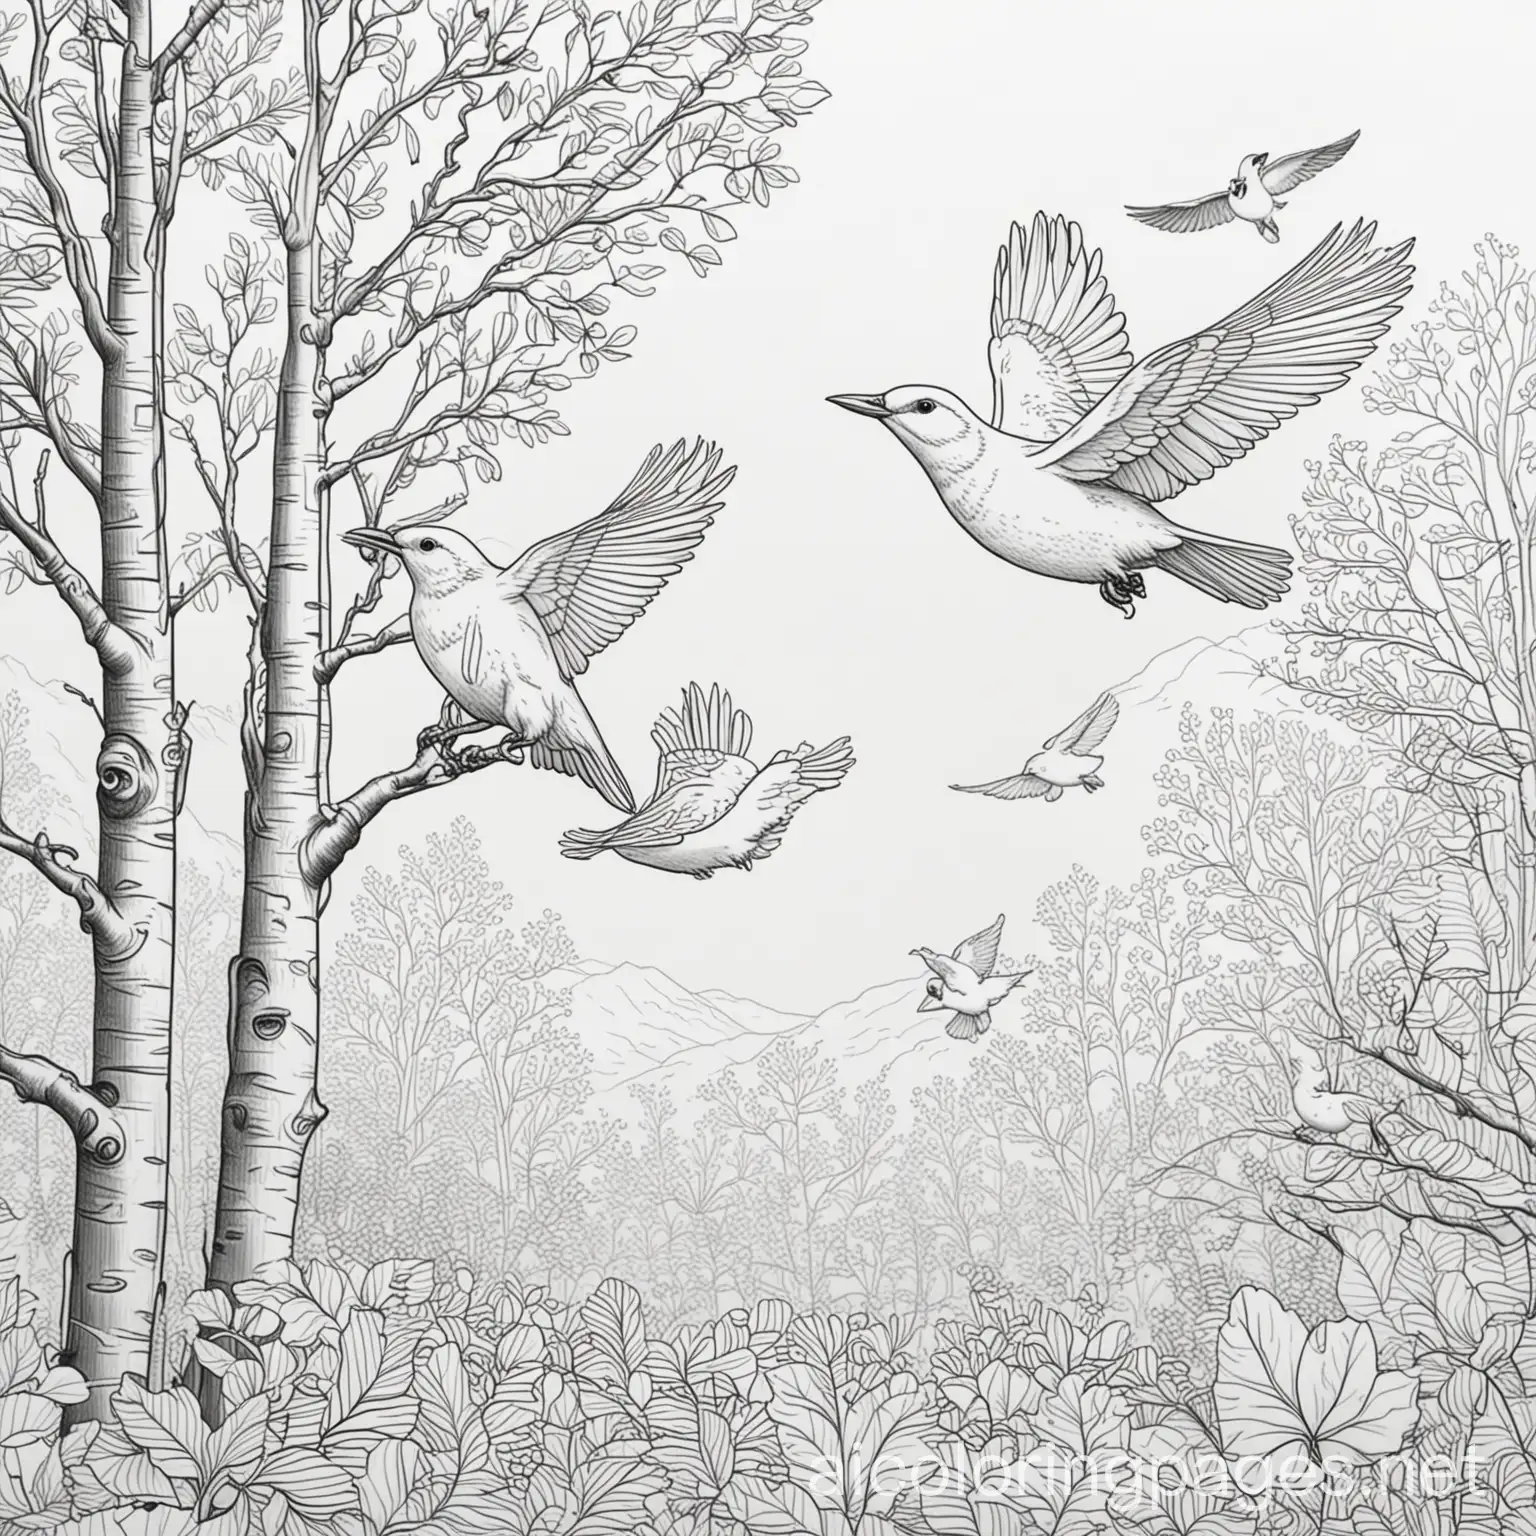 Birds-Flying-Through-Trees-Coloring-Page-Black-and-White-Line-Art-for-Kids